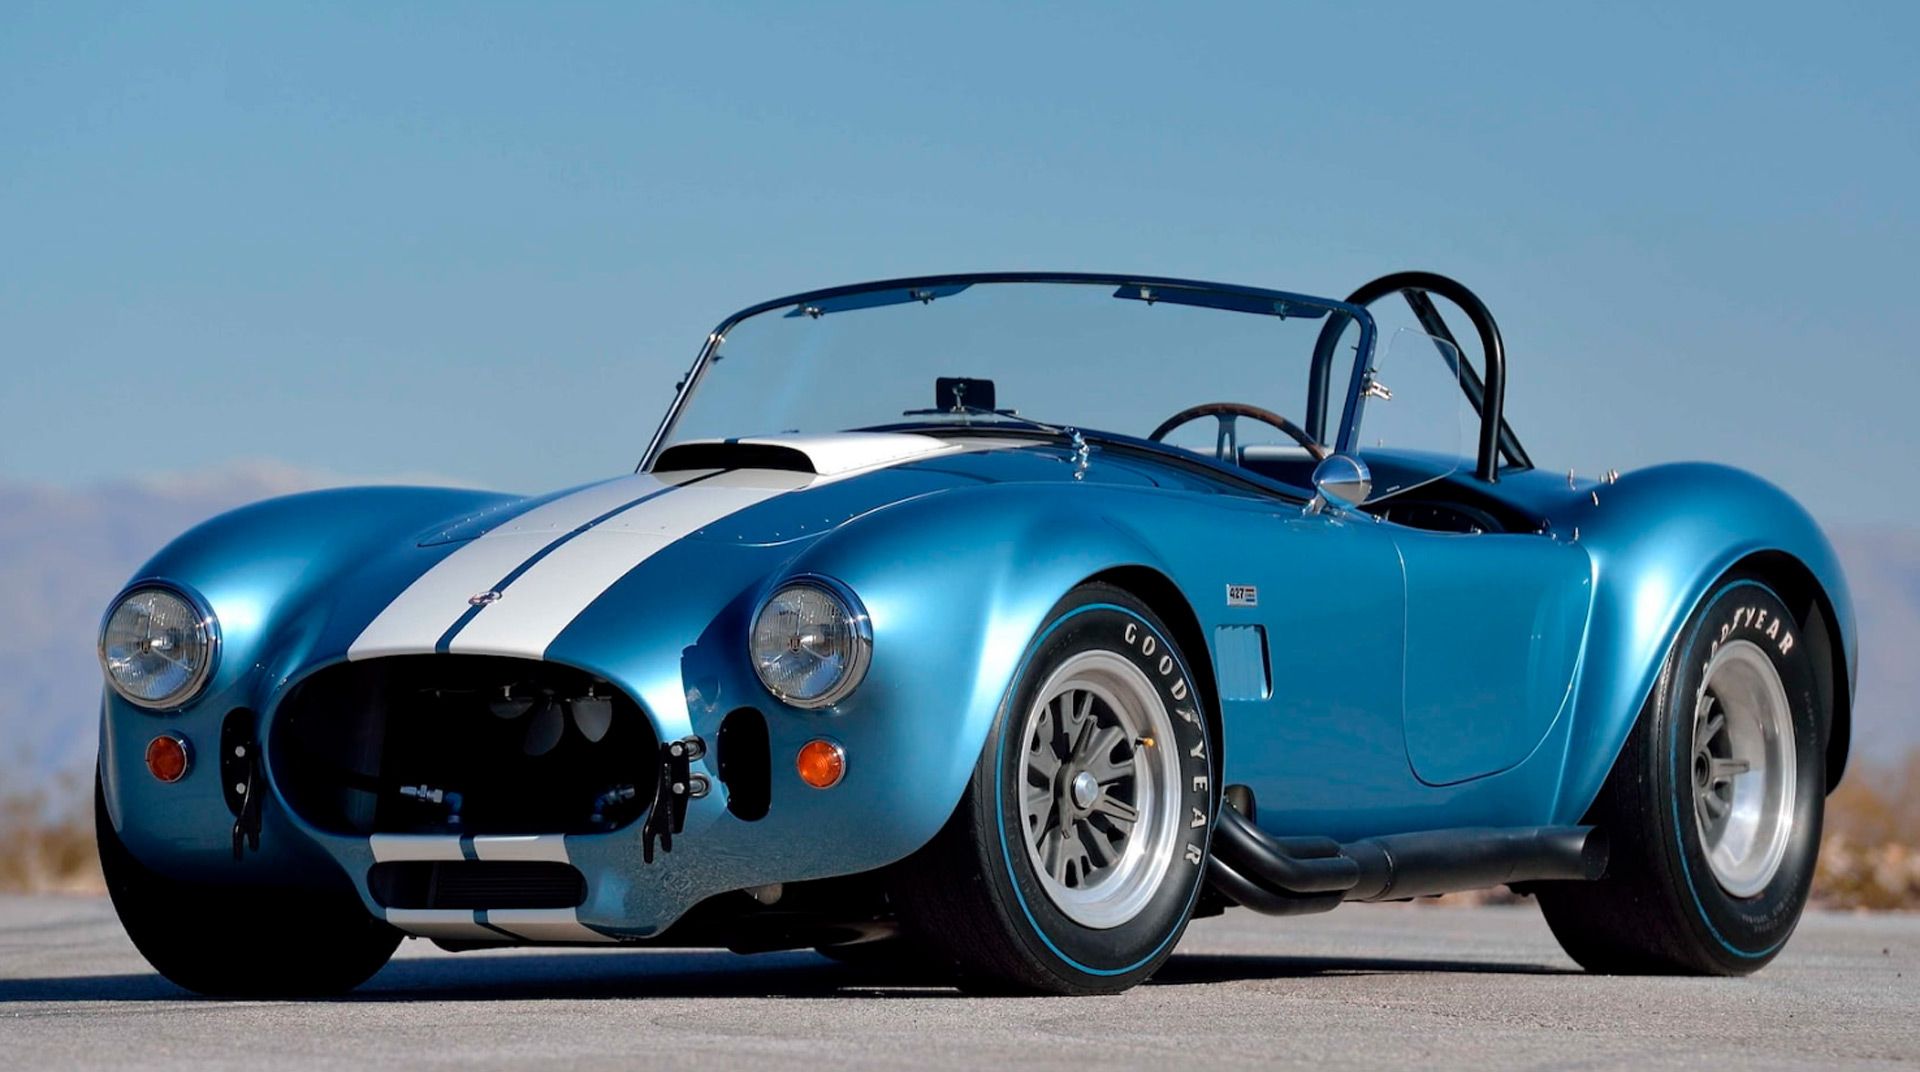 1966 Shelby AC cobra on the highway